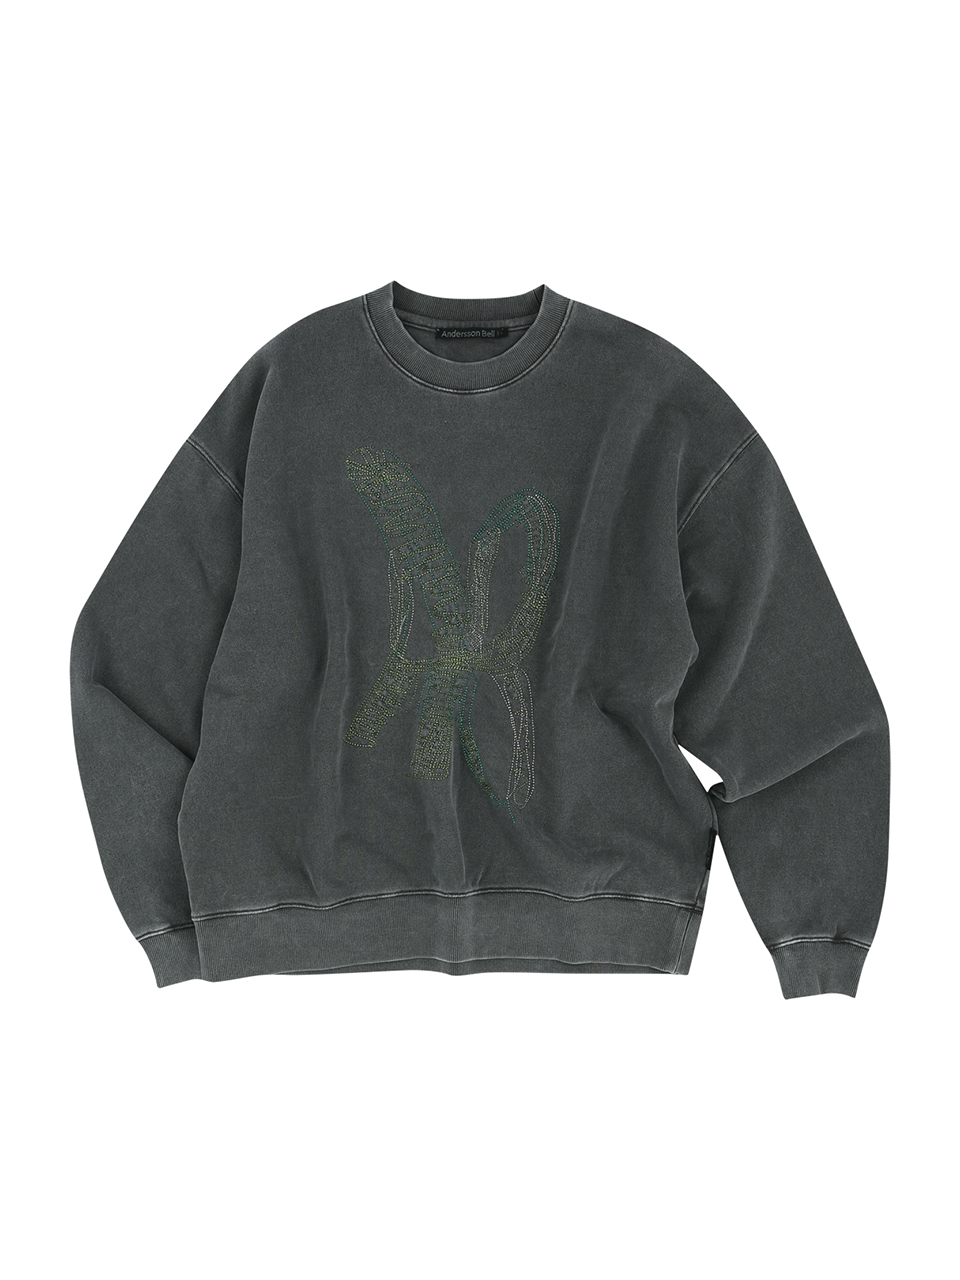 ANDERSSON BELL - UNISEX NEW AB LOGO EMBROIDERY SWEATSHIRT (CHARCOAL)